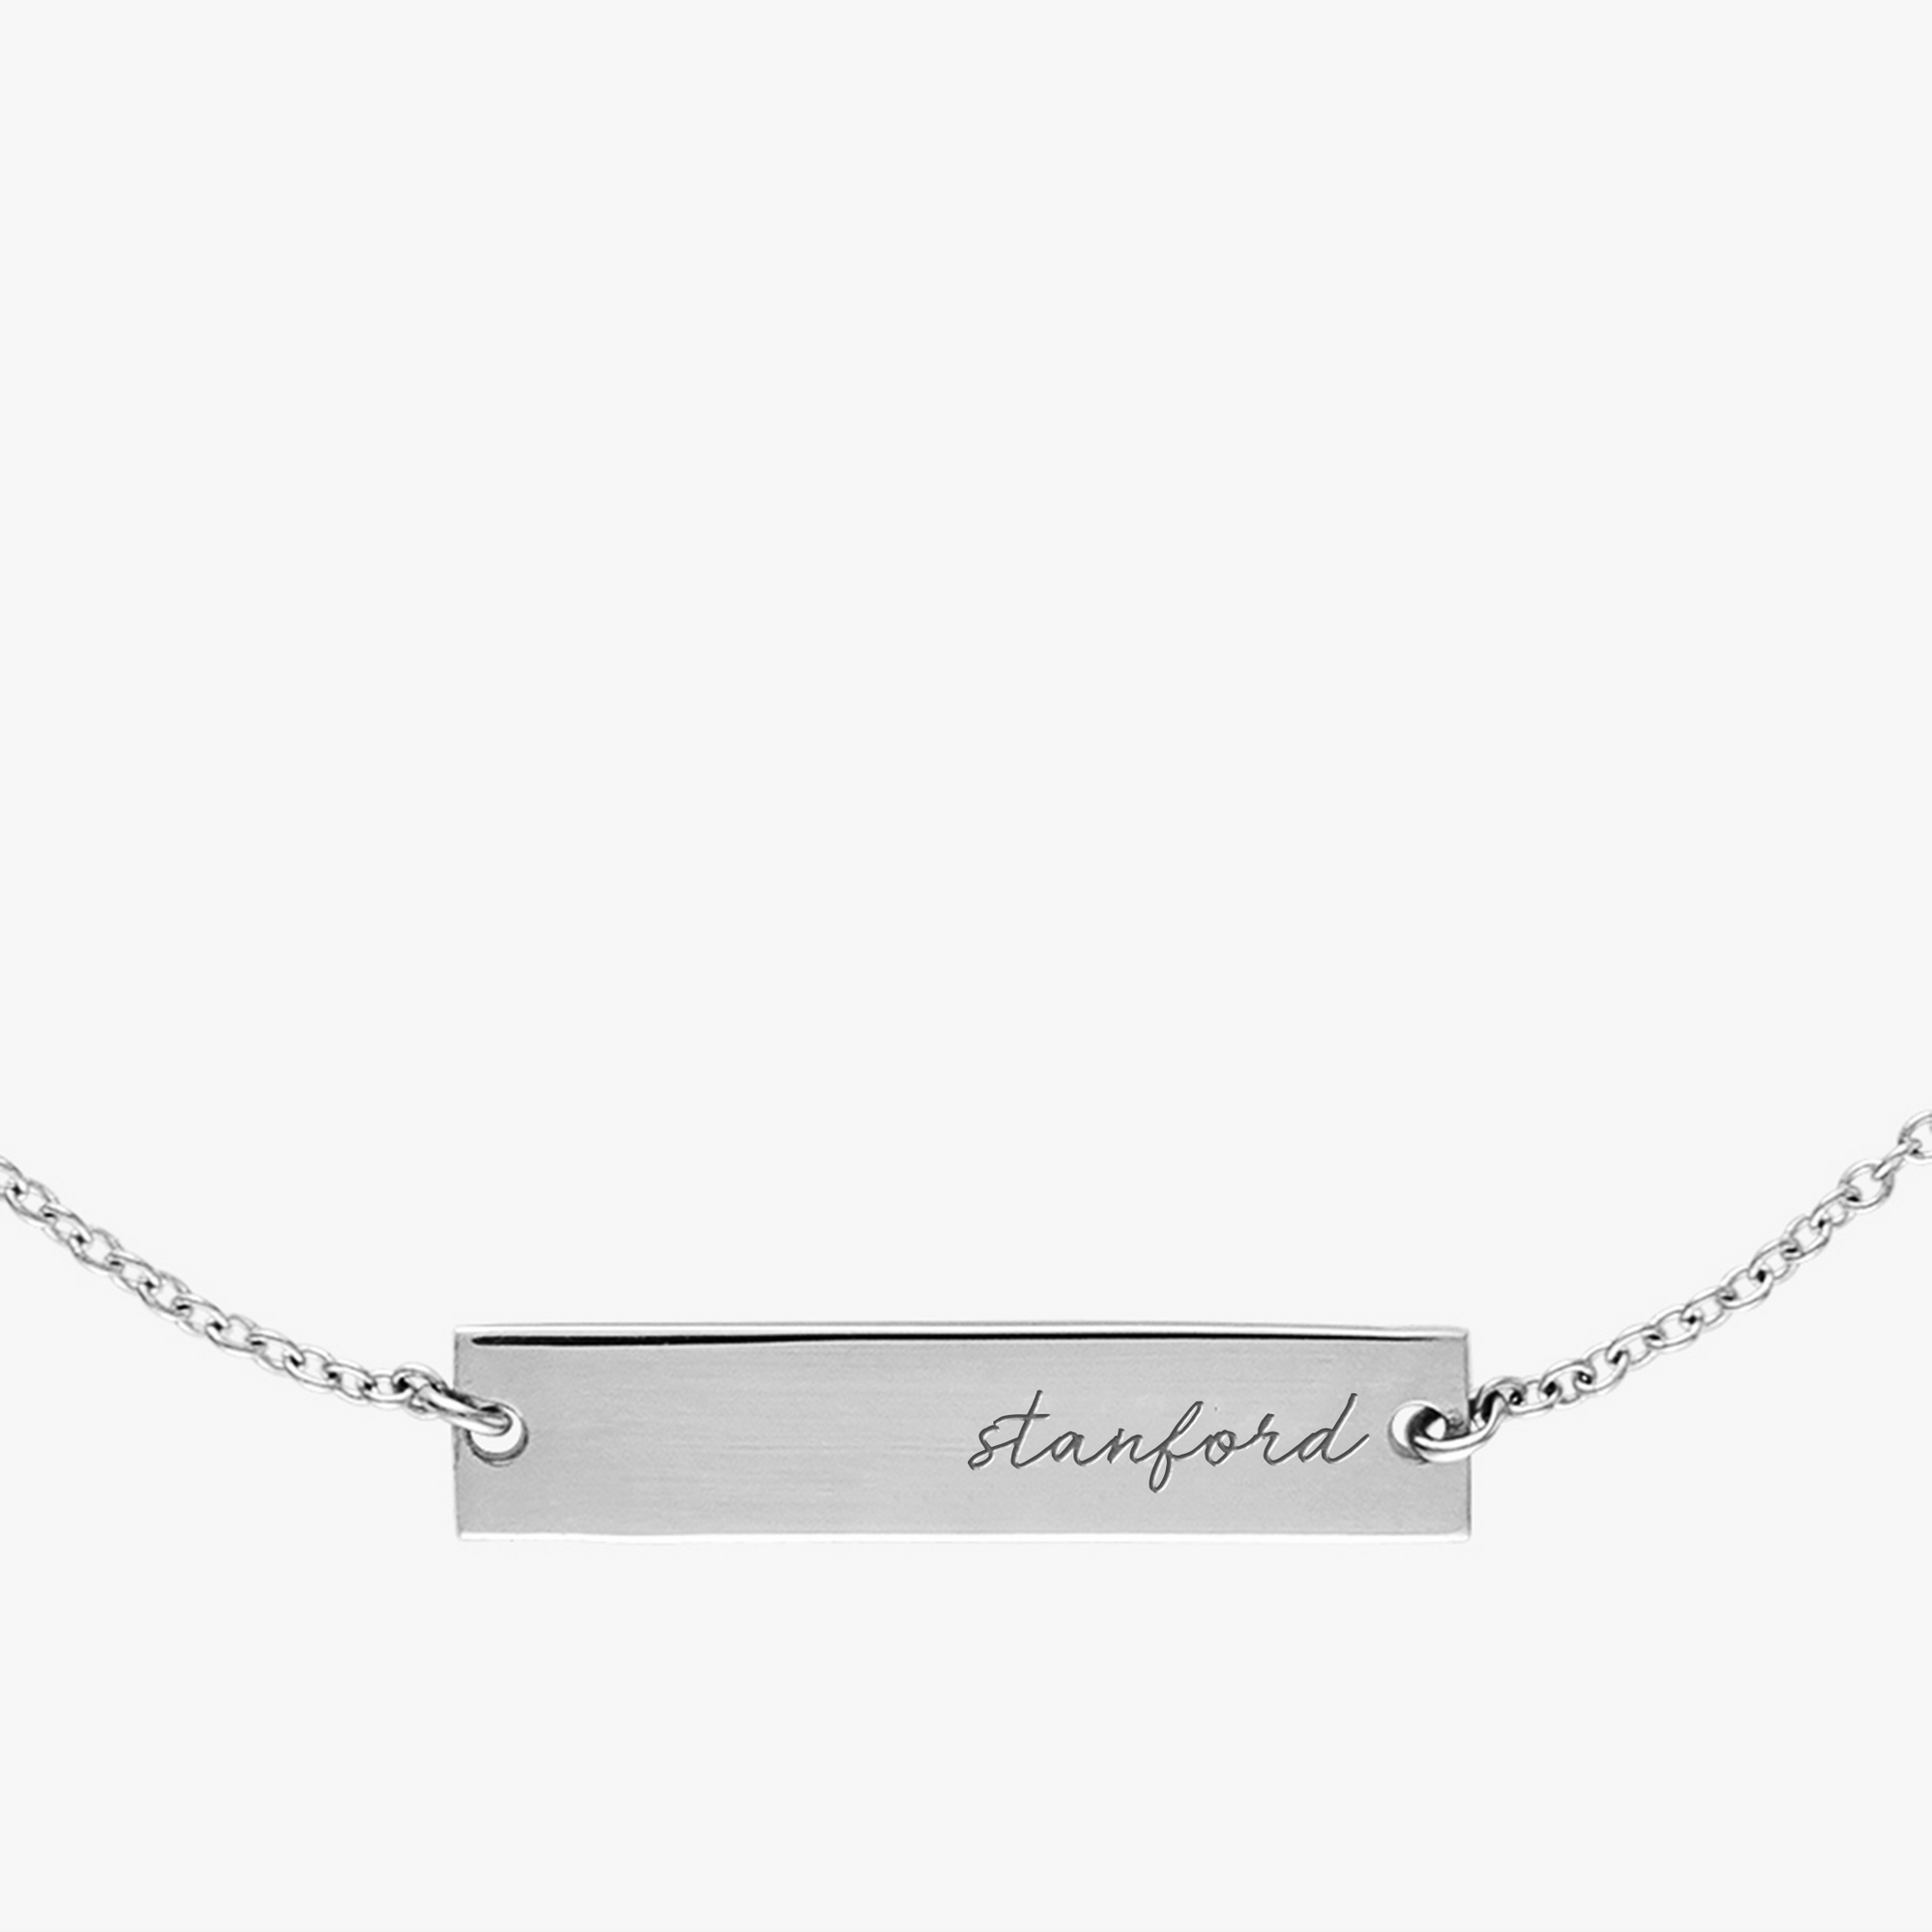 Stanford University Horizontal Necklace Sterling Silver Close Up